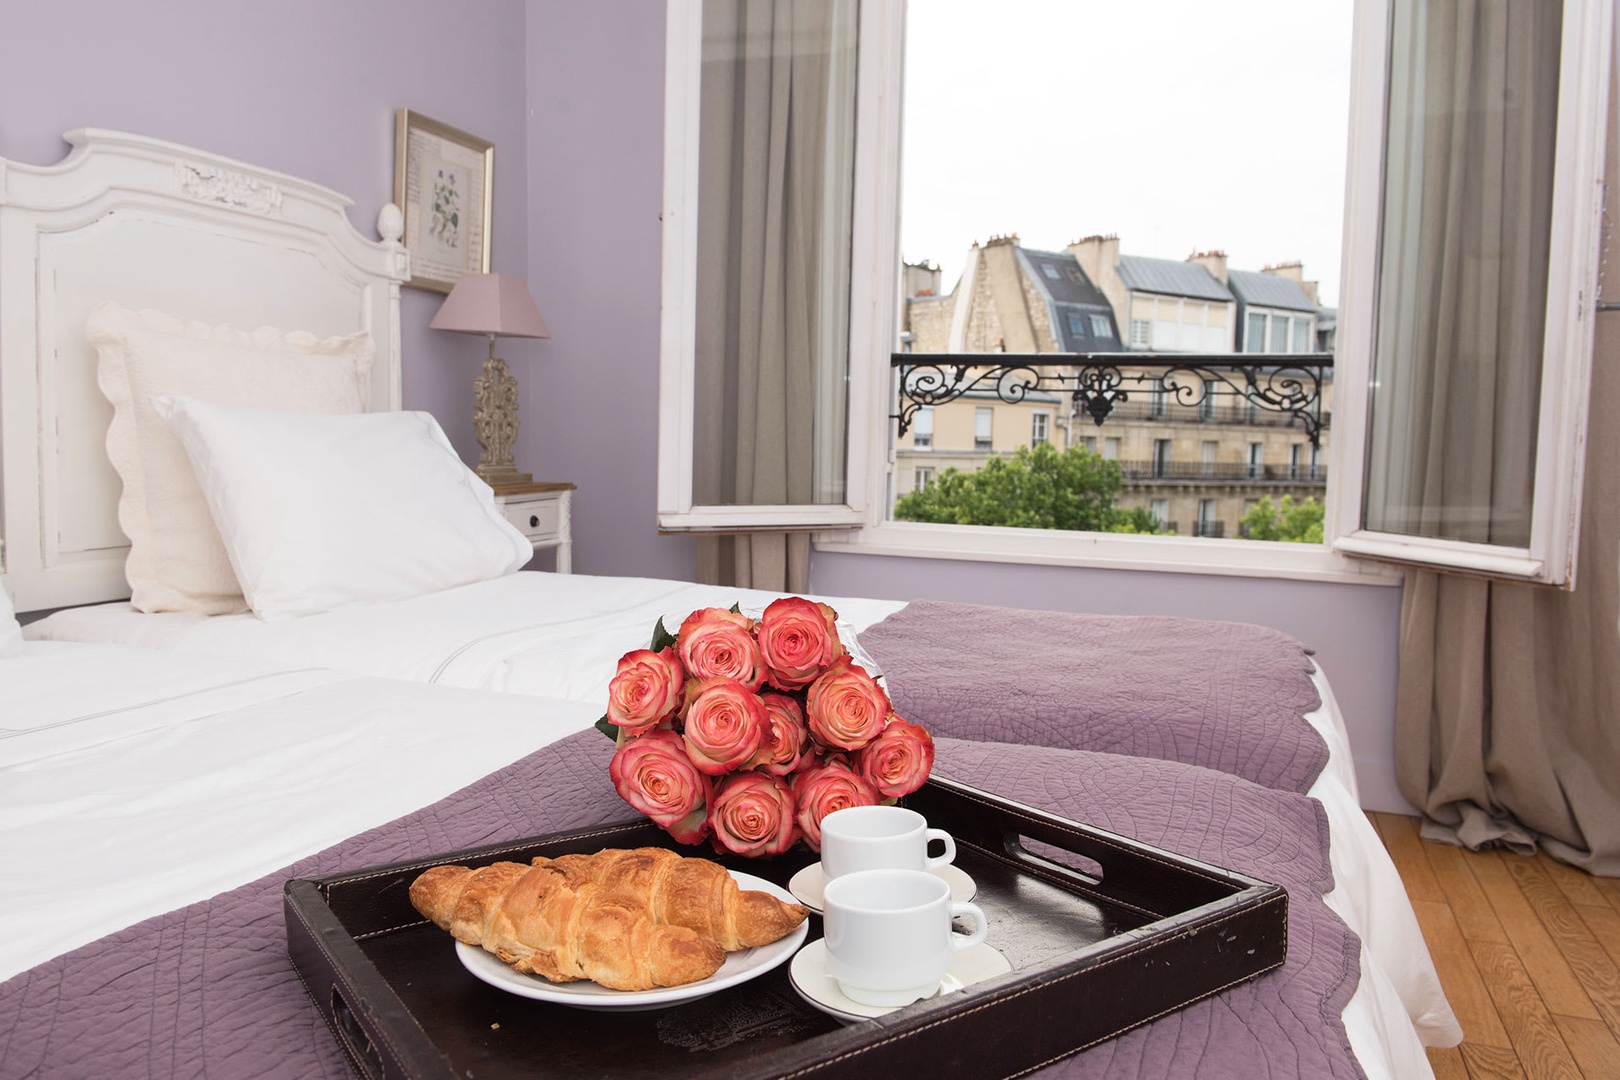 Sleep in and enjoy your breakfast in bed.